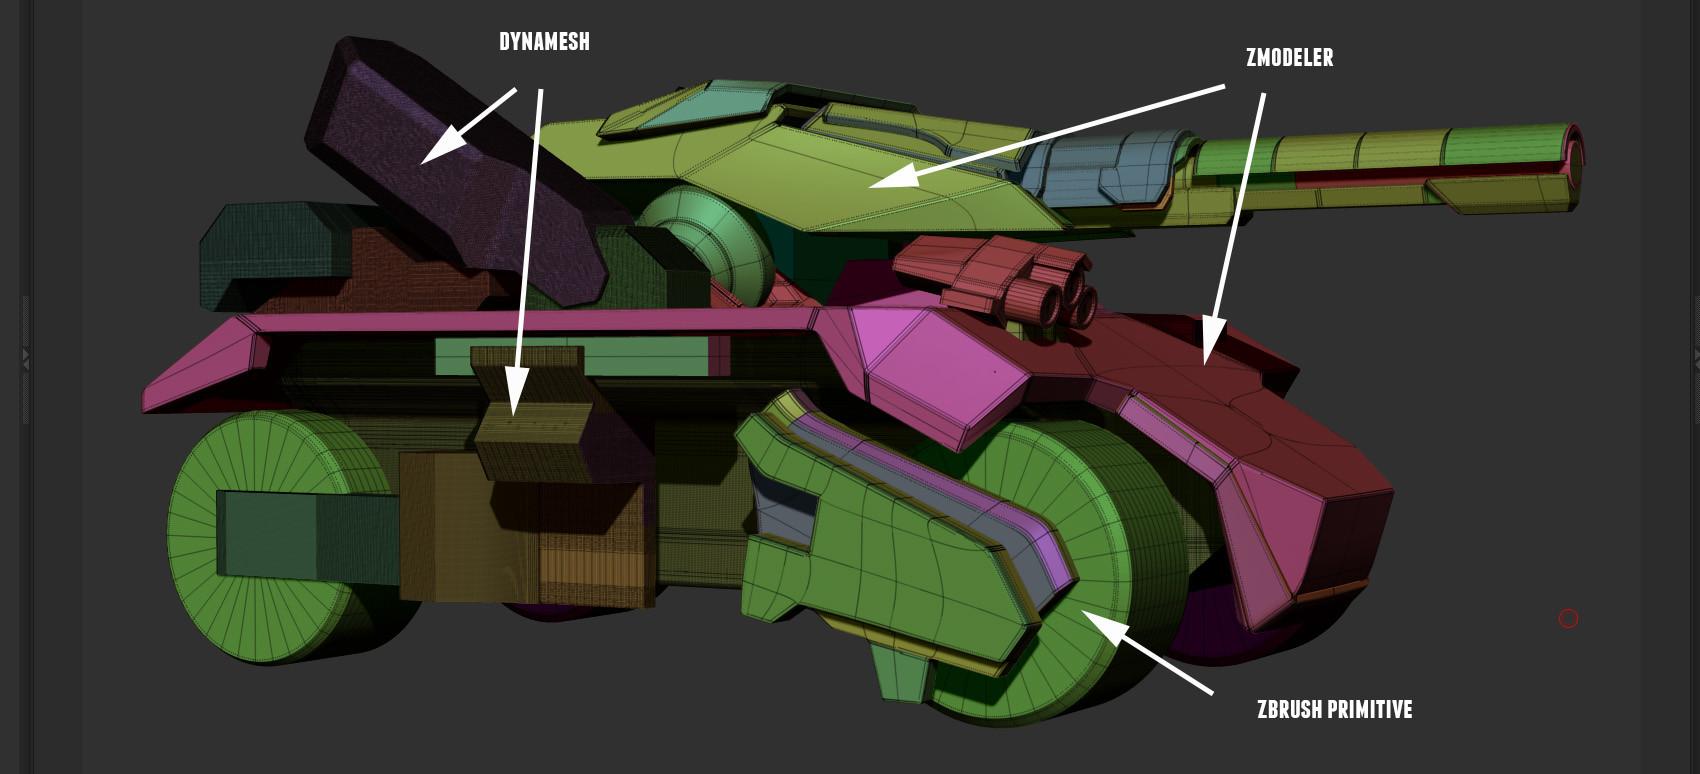 In-progress image of Tank showing where Oster used Dynamesh, ZModeler, and ZBrush Primitive on the 3D model